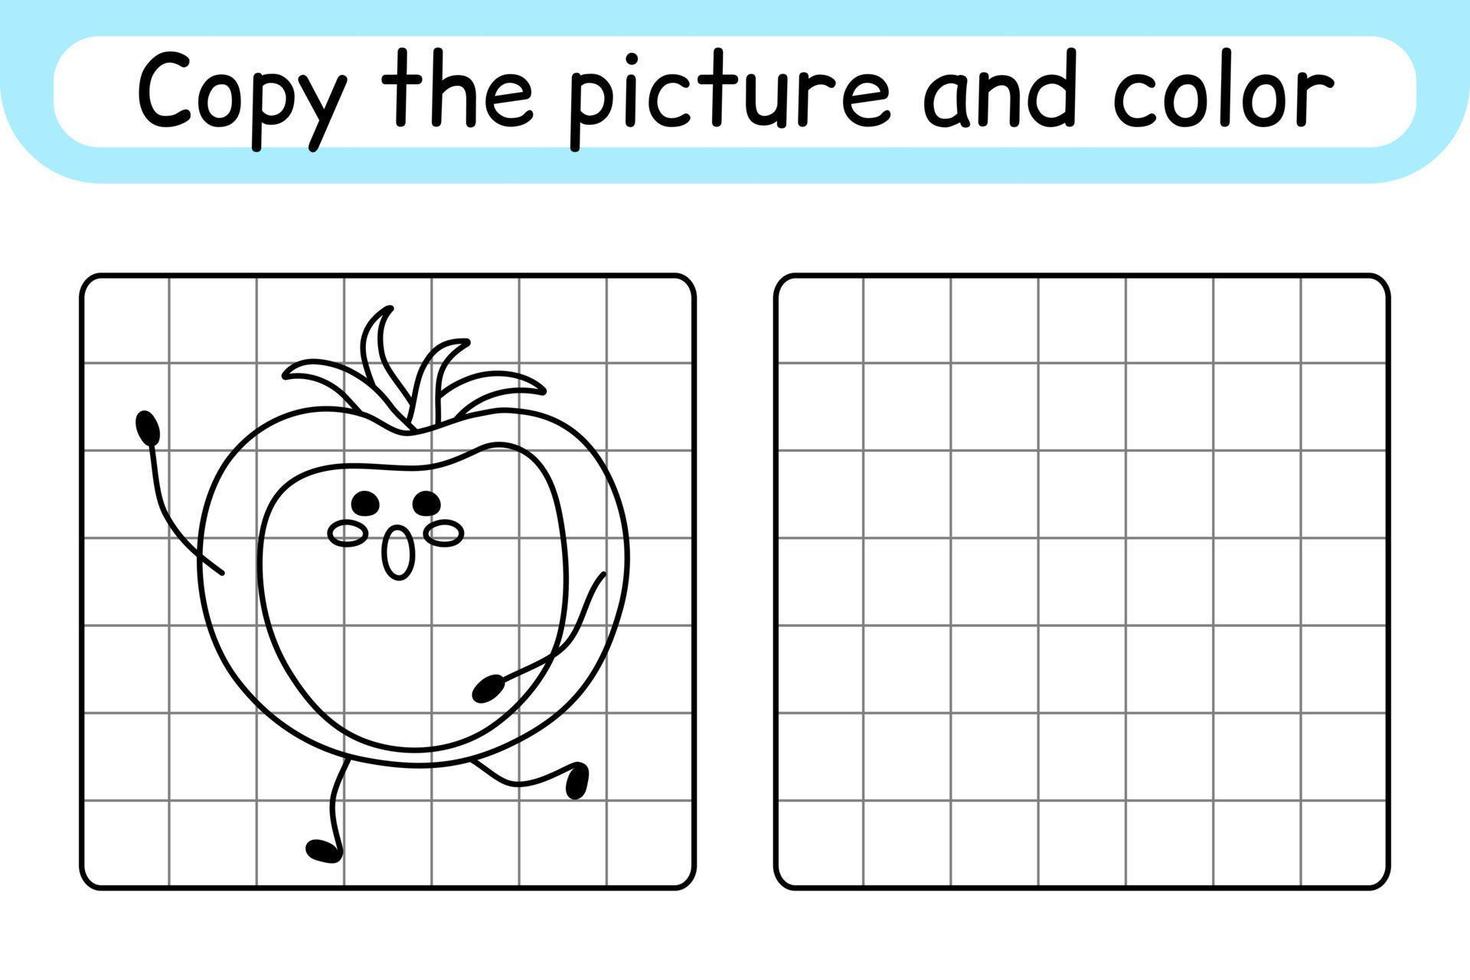 Copy the picture and color tomato. Complete the picture. Finish the image. Coloring book. Educational drawing exercise game for children vector